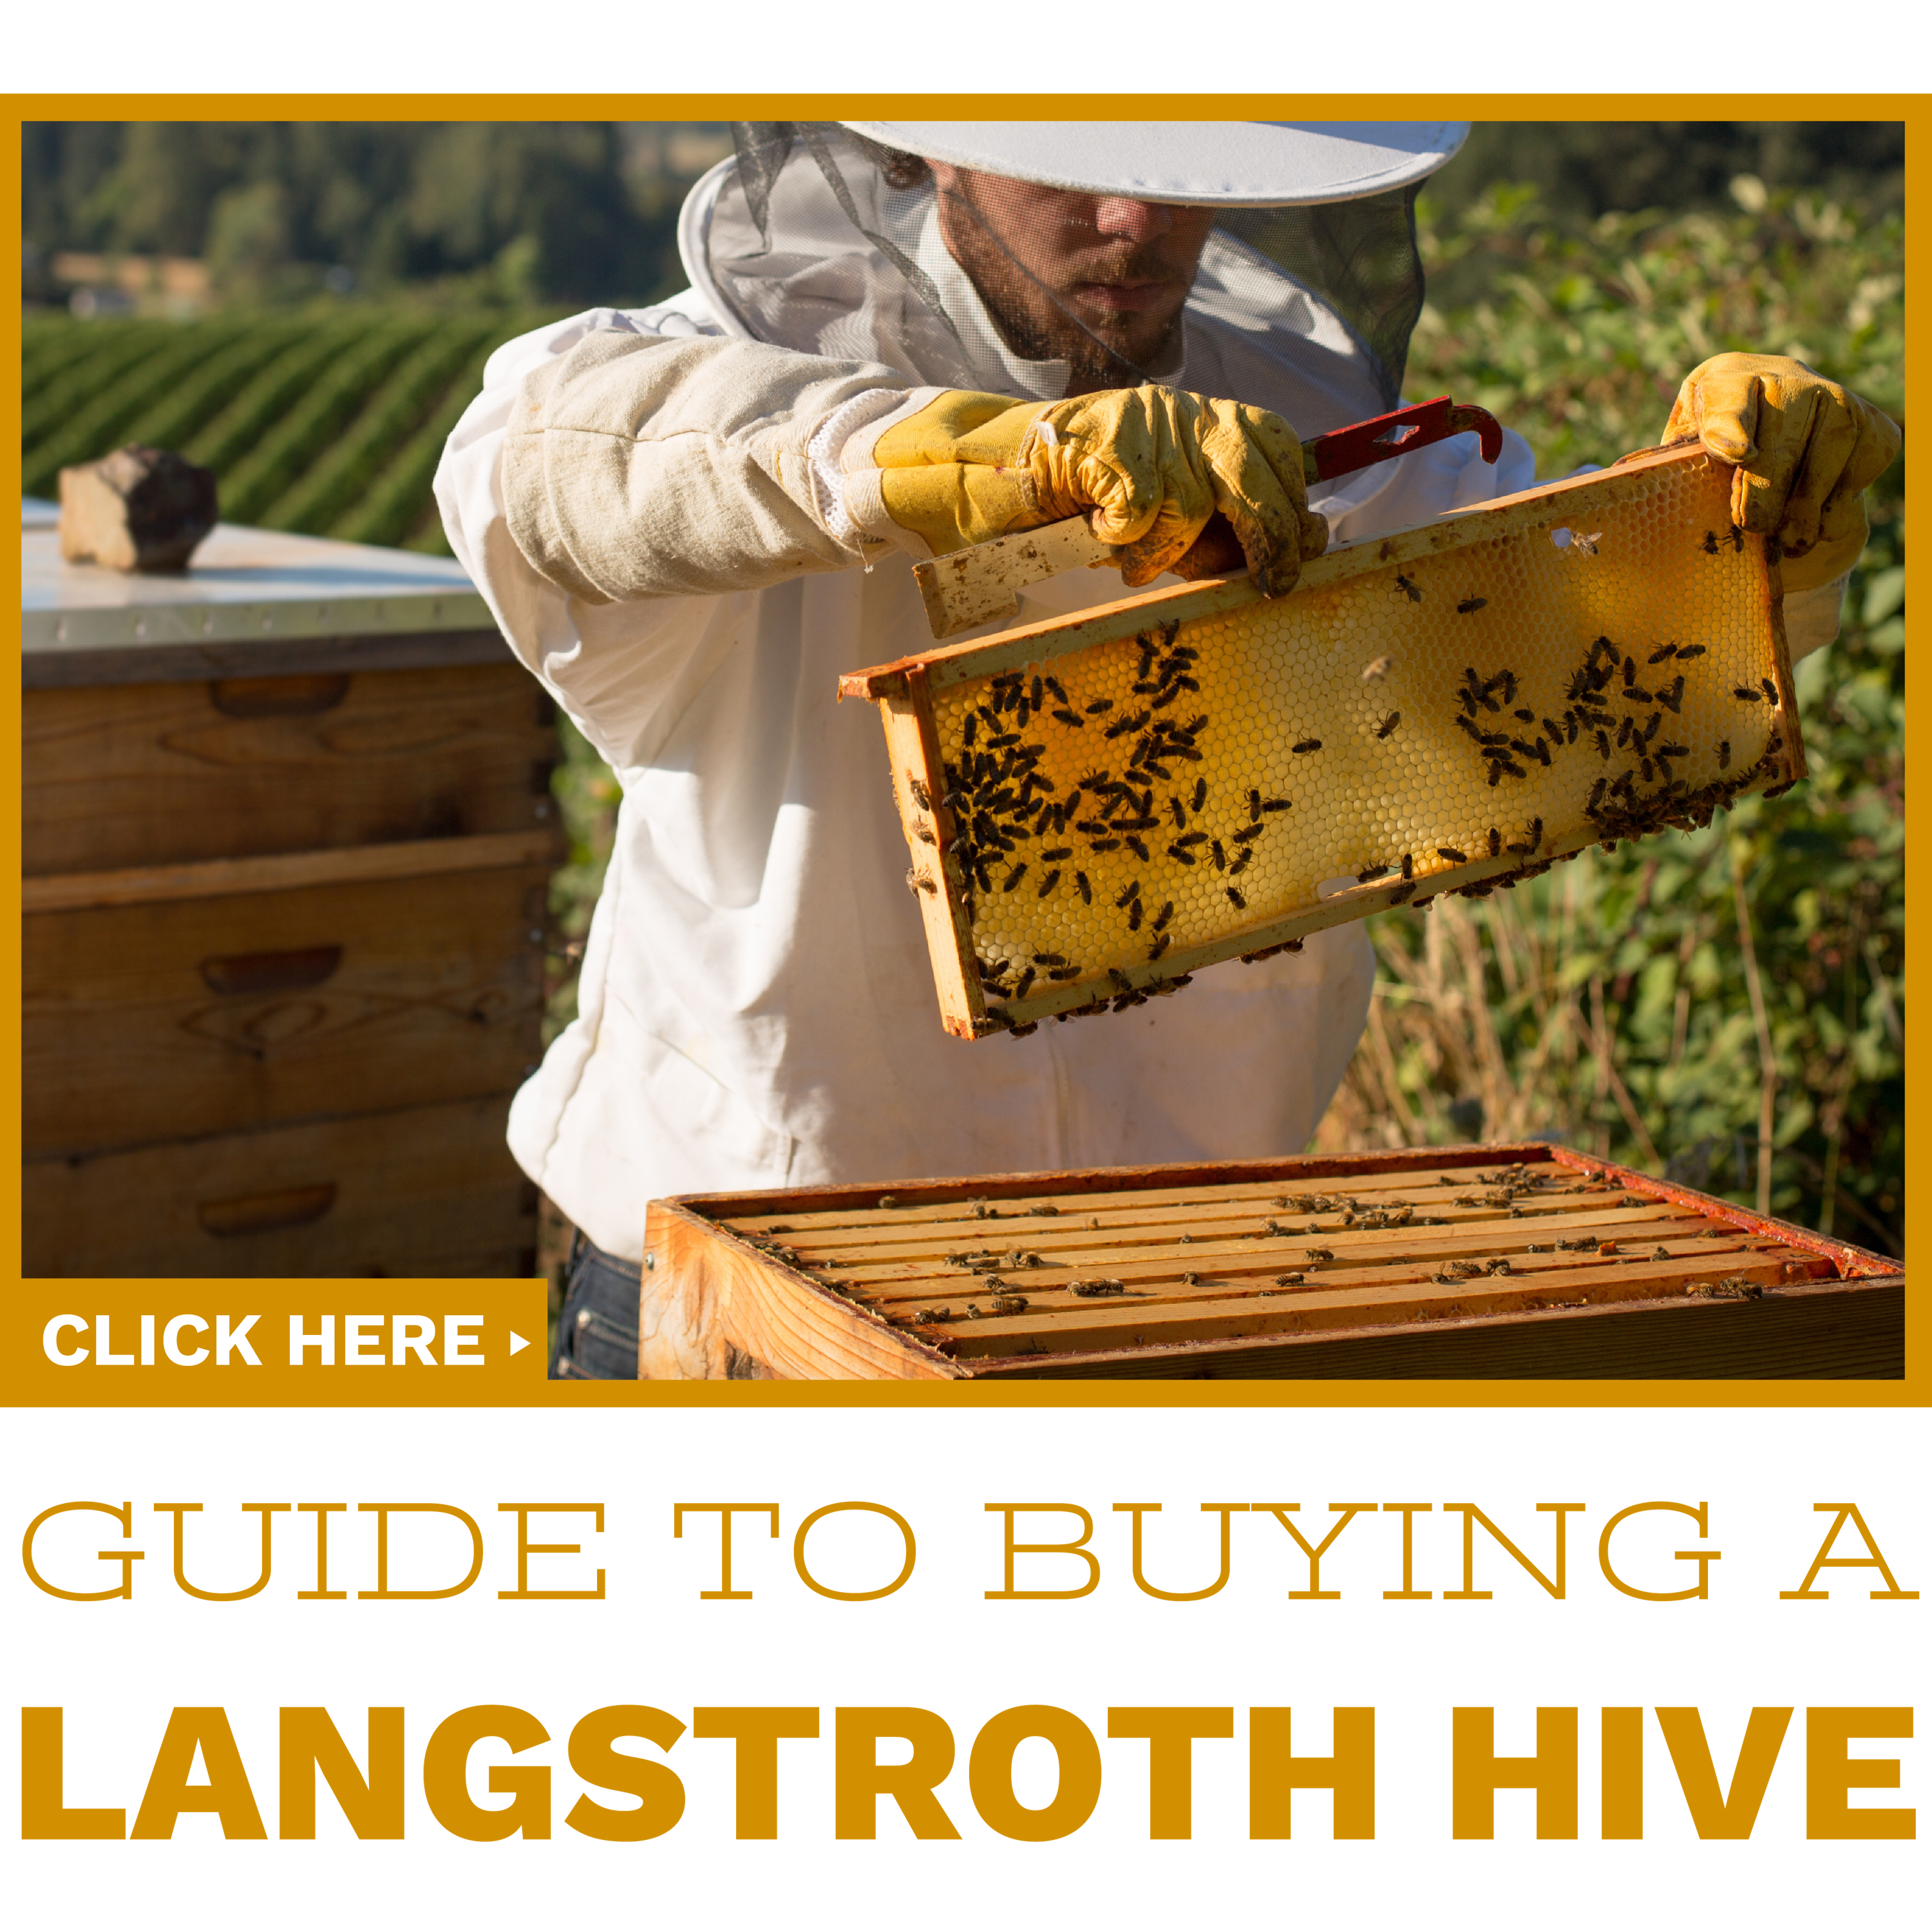 Click to read our guide to buying your first langstroth hive